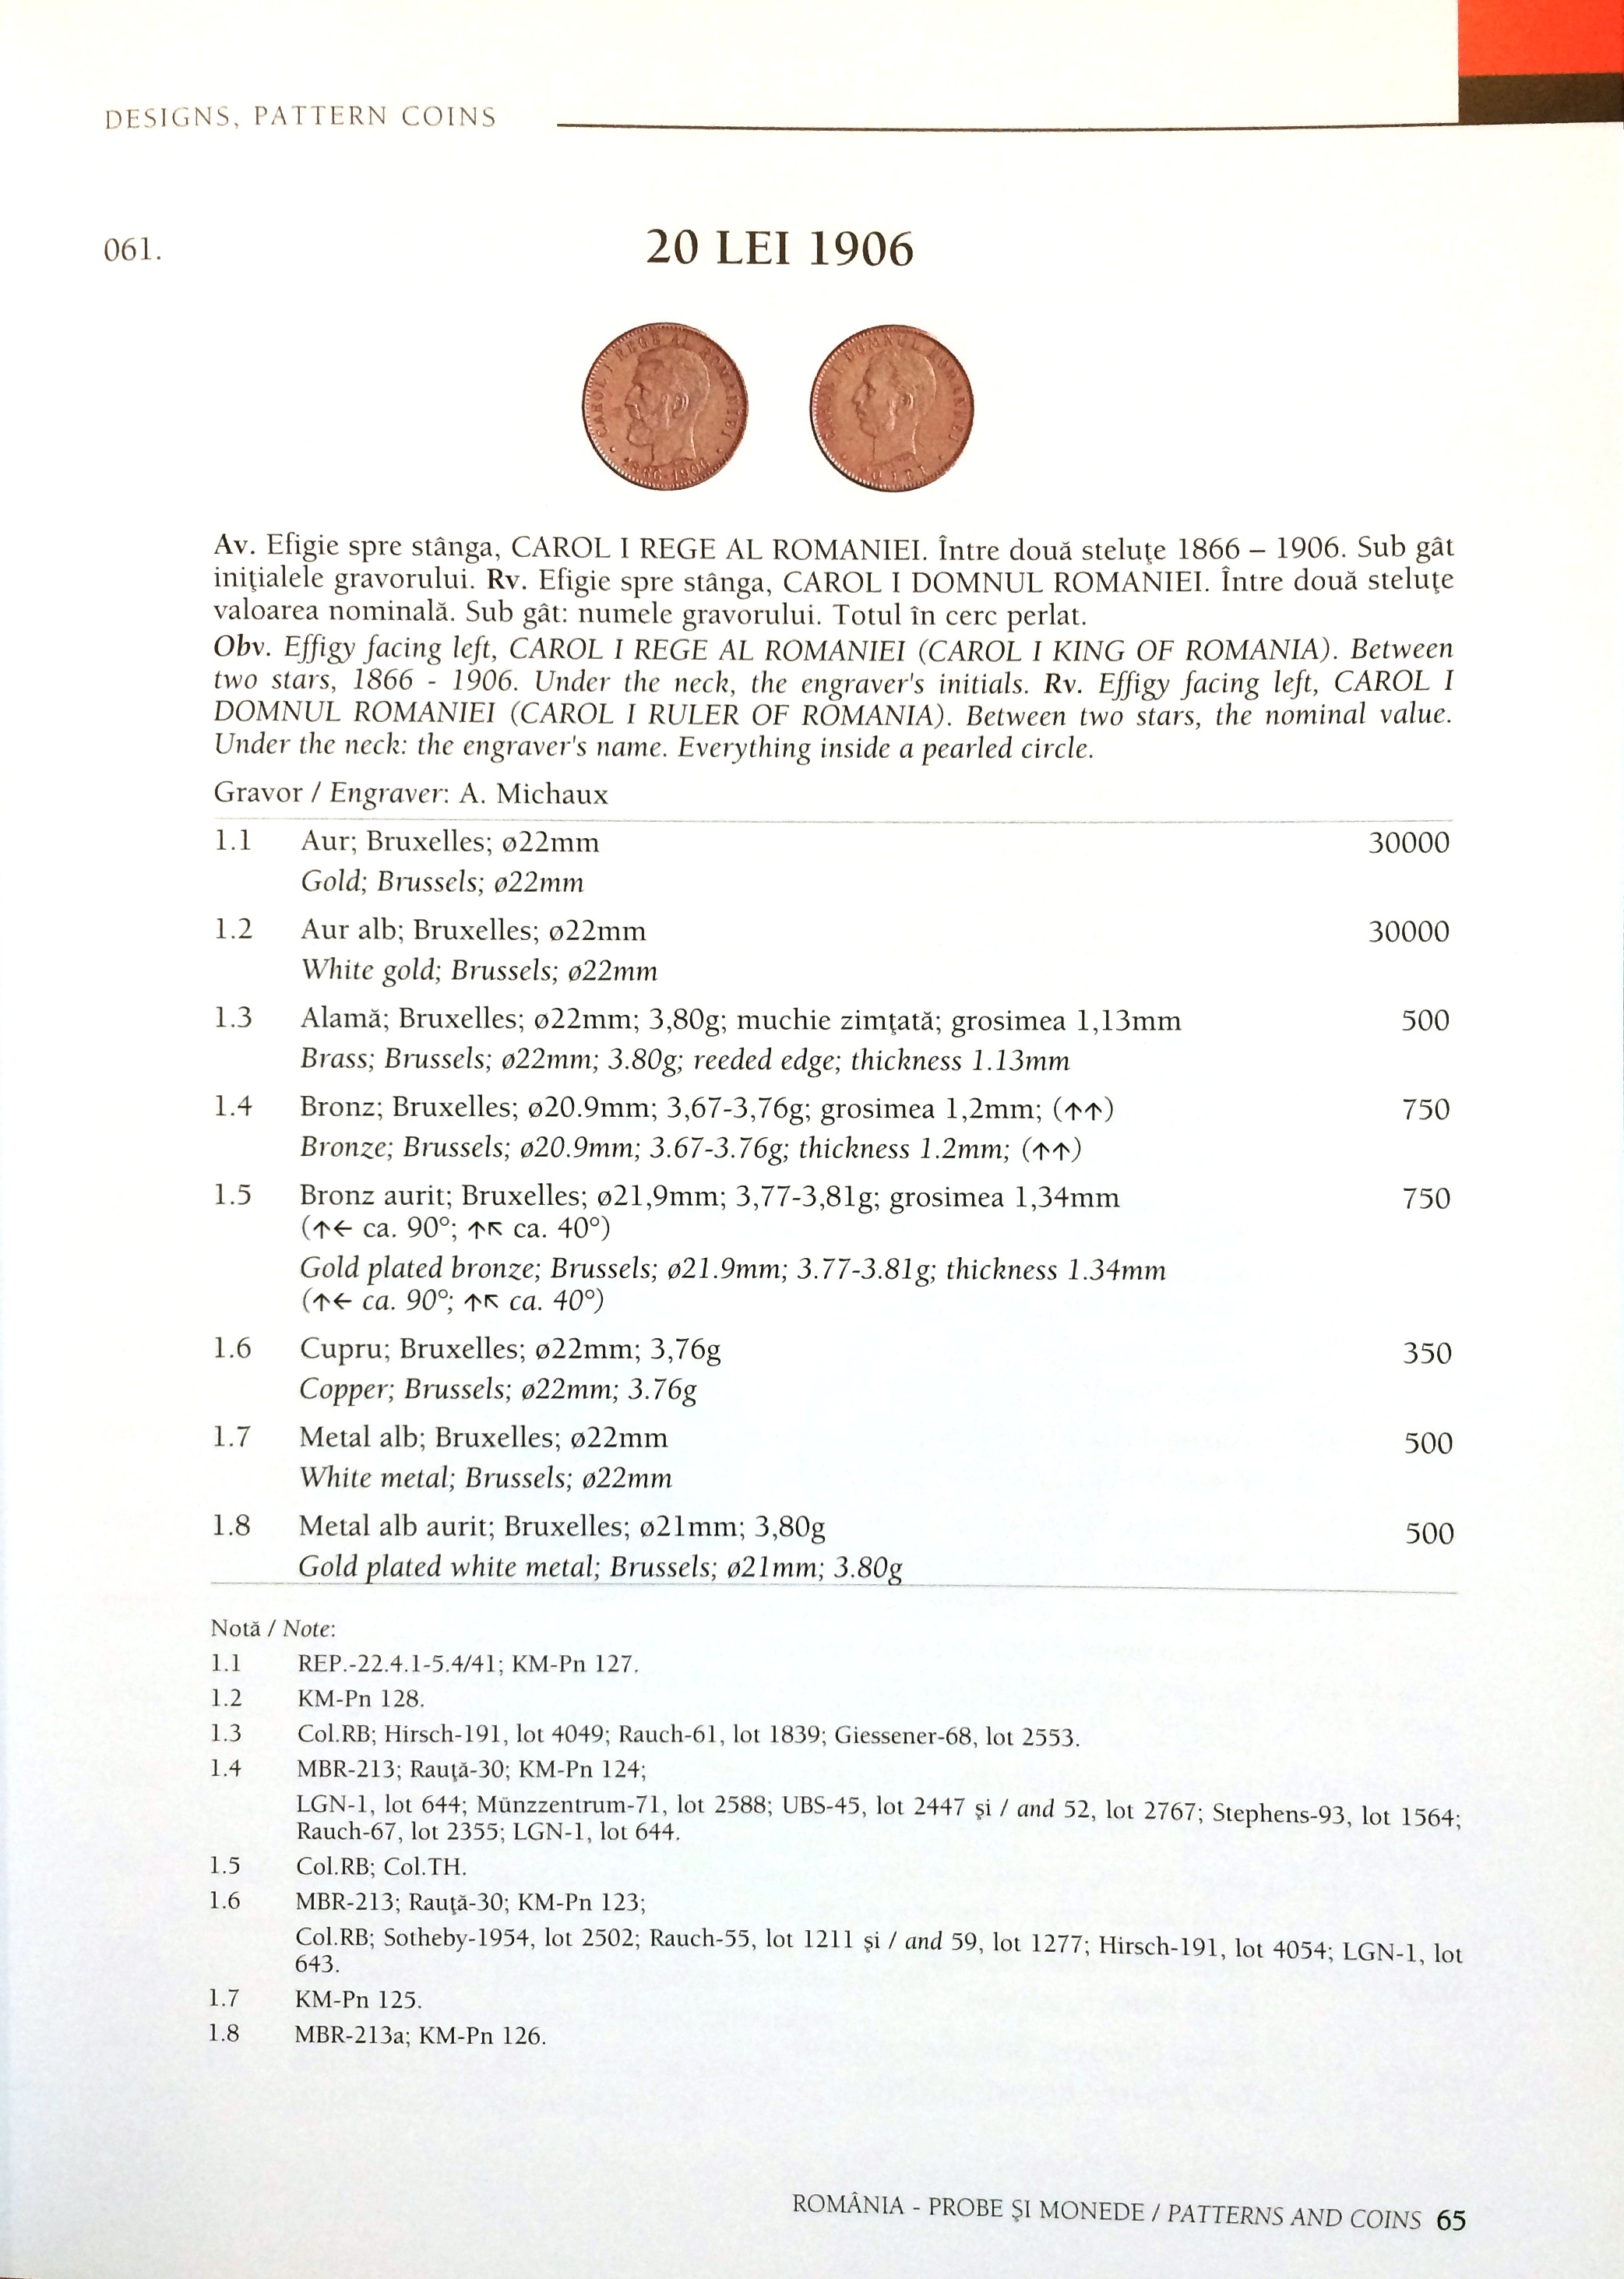 Romania - Designs,Pattern coins and catalogue of Issued coins - Image 2 of 4